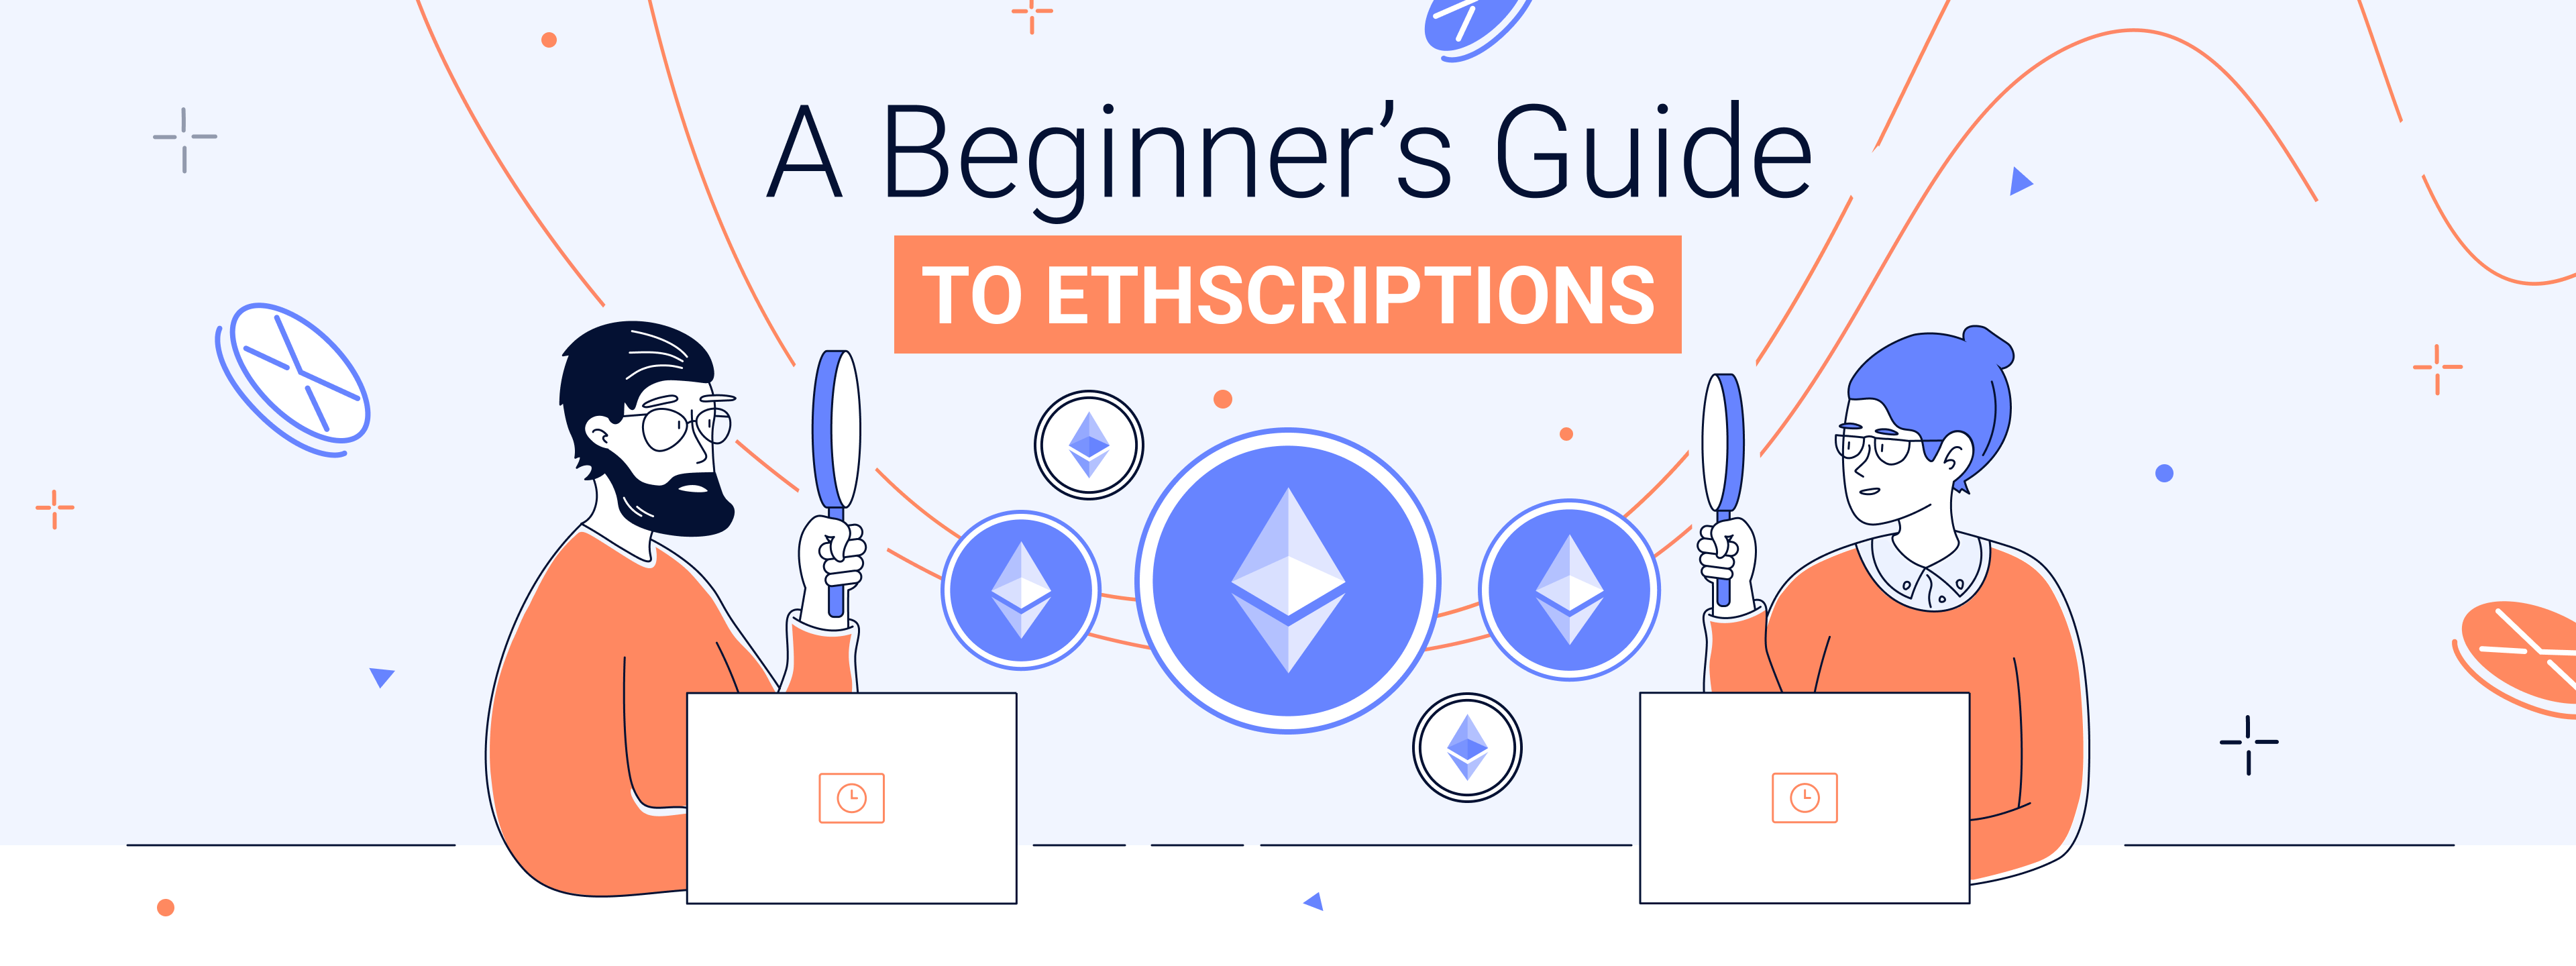 A Beginner’s Guide To Ethscriptions